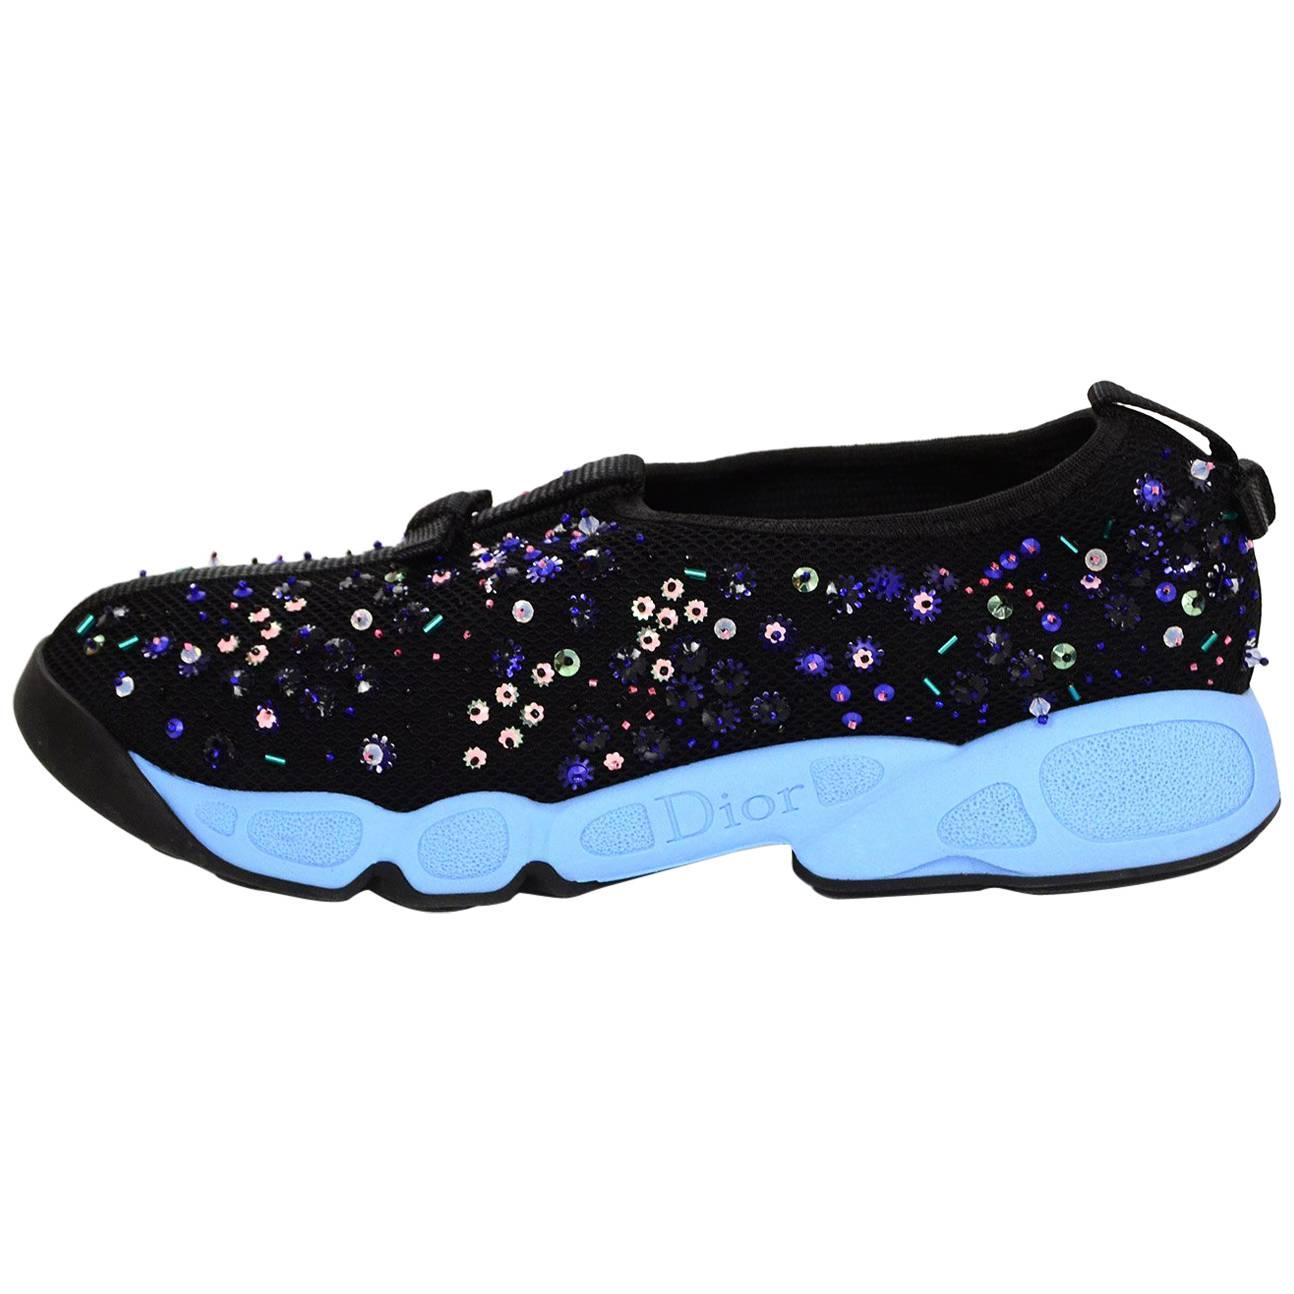 Christian Dior Black and Blue Beaded Fusion Sneakers Sz 38.5